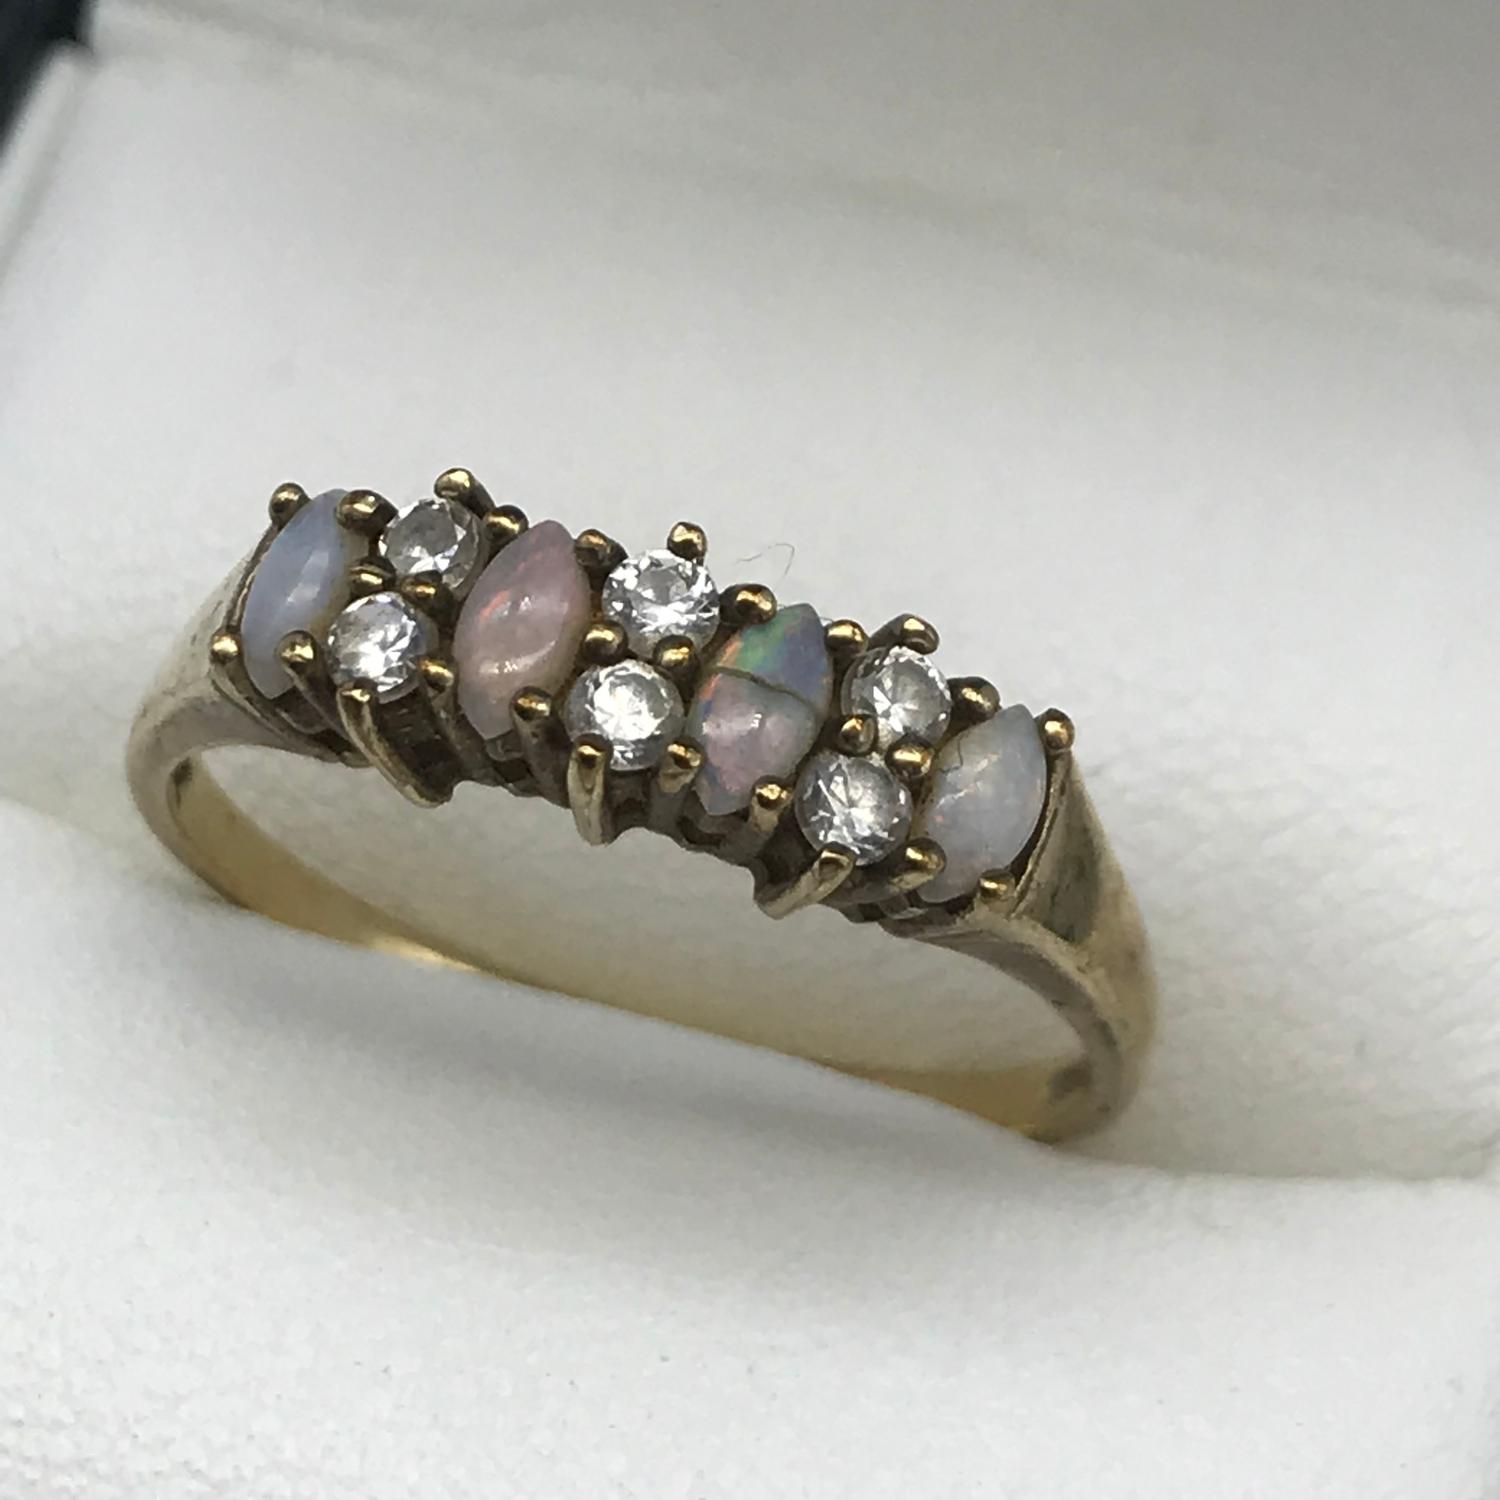 A Ladies 9ct gold, opal and cz stone ring, Ring size R, Weighs 1.86grams